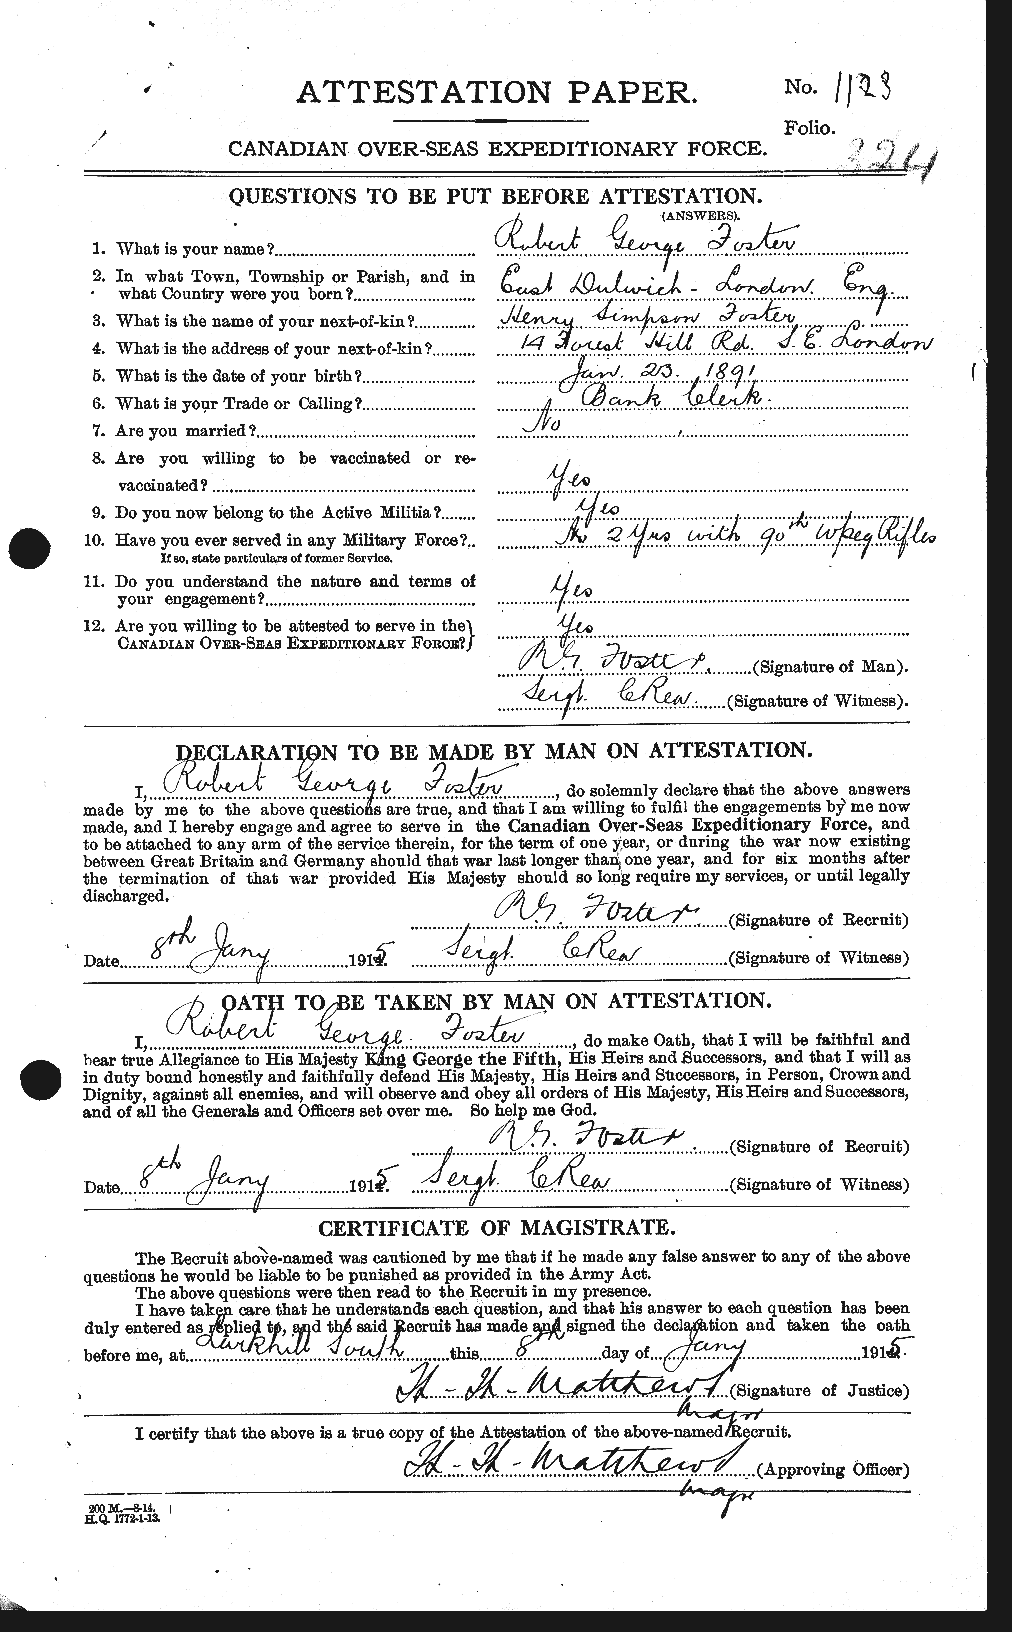 Personnel Records of the First World War - CEF 335174a